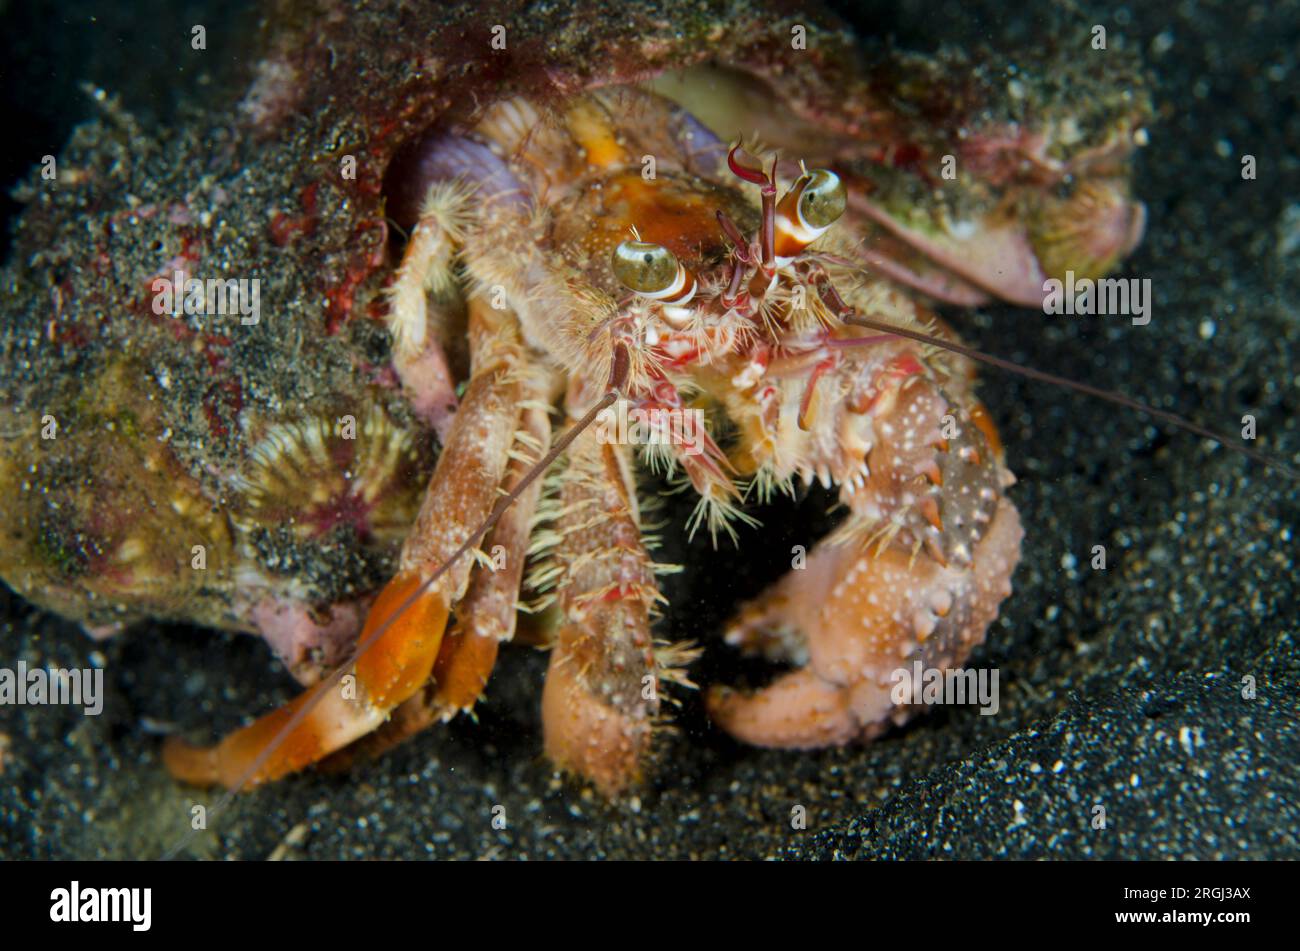 Anemone Hermit Crab, Dardanus pedunculatus, with Sea Anemones, Calliactis polypus, on shell for camouflage and protection, Aer Perang dive site, Lembe Stock Photo